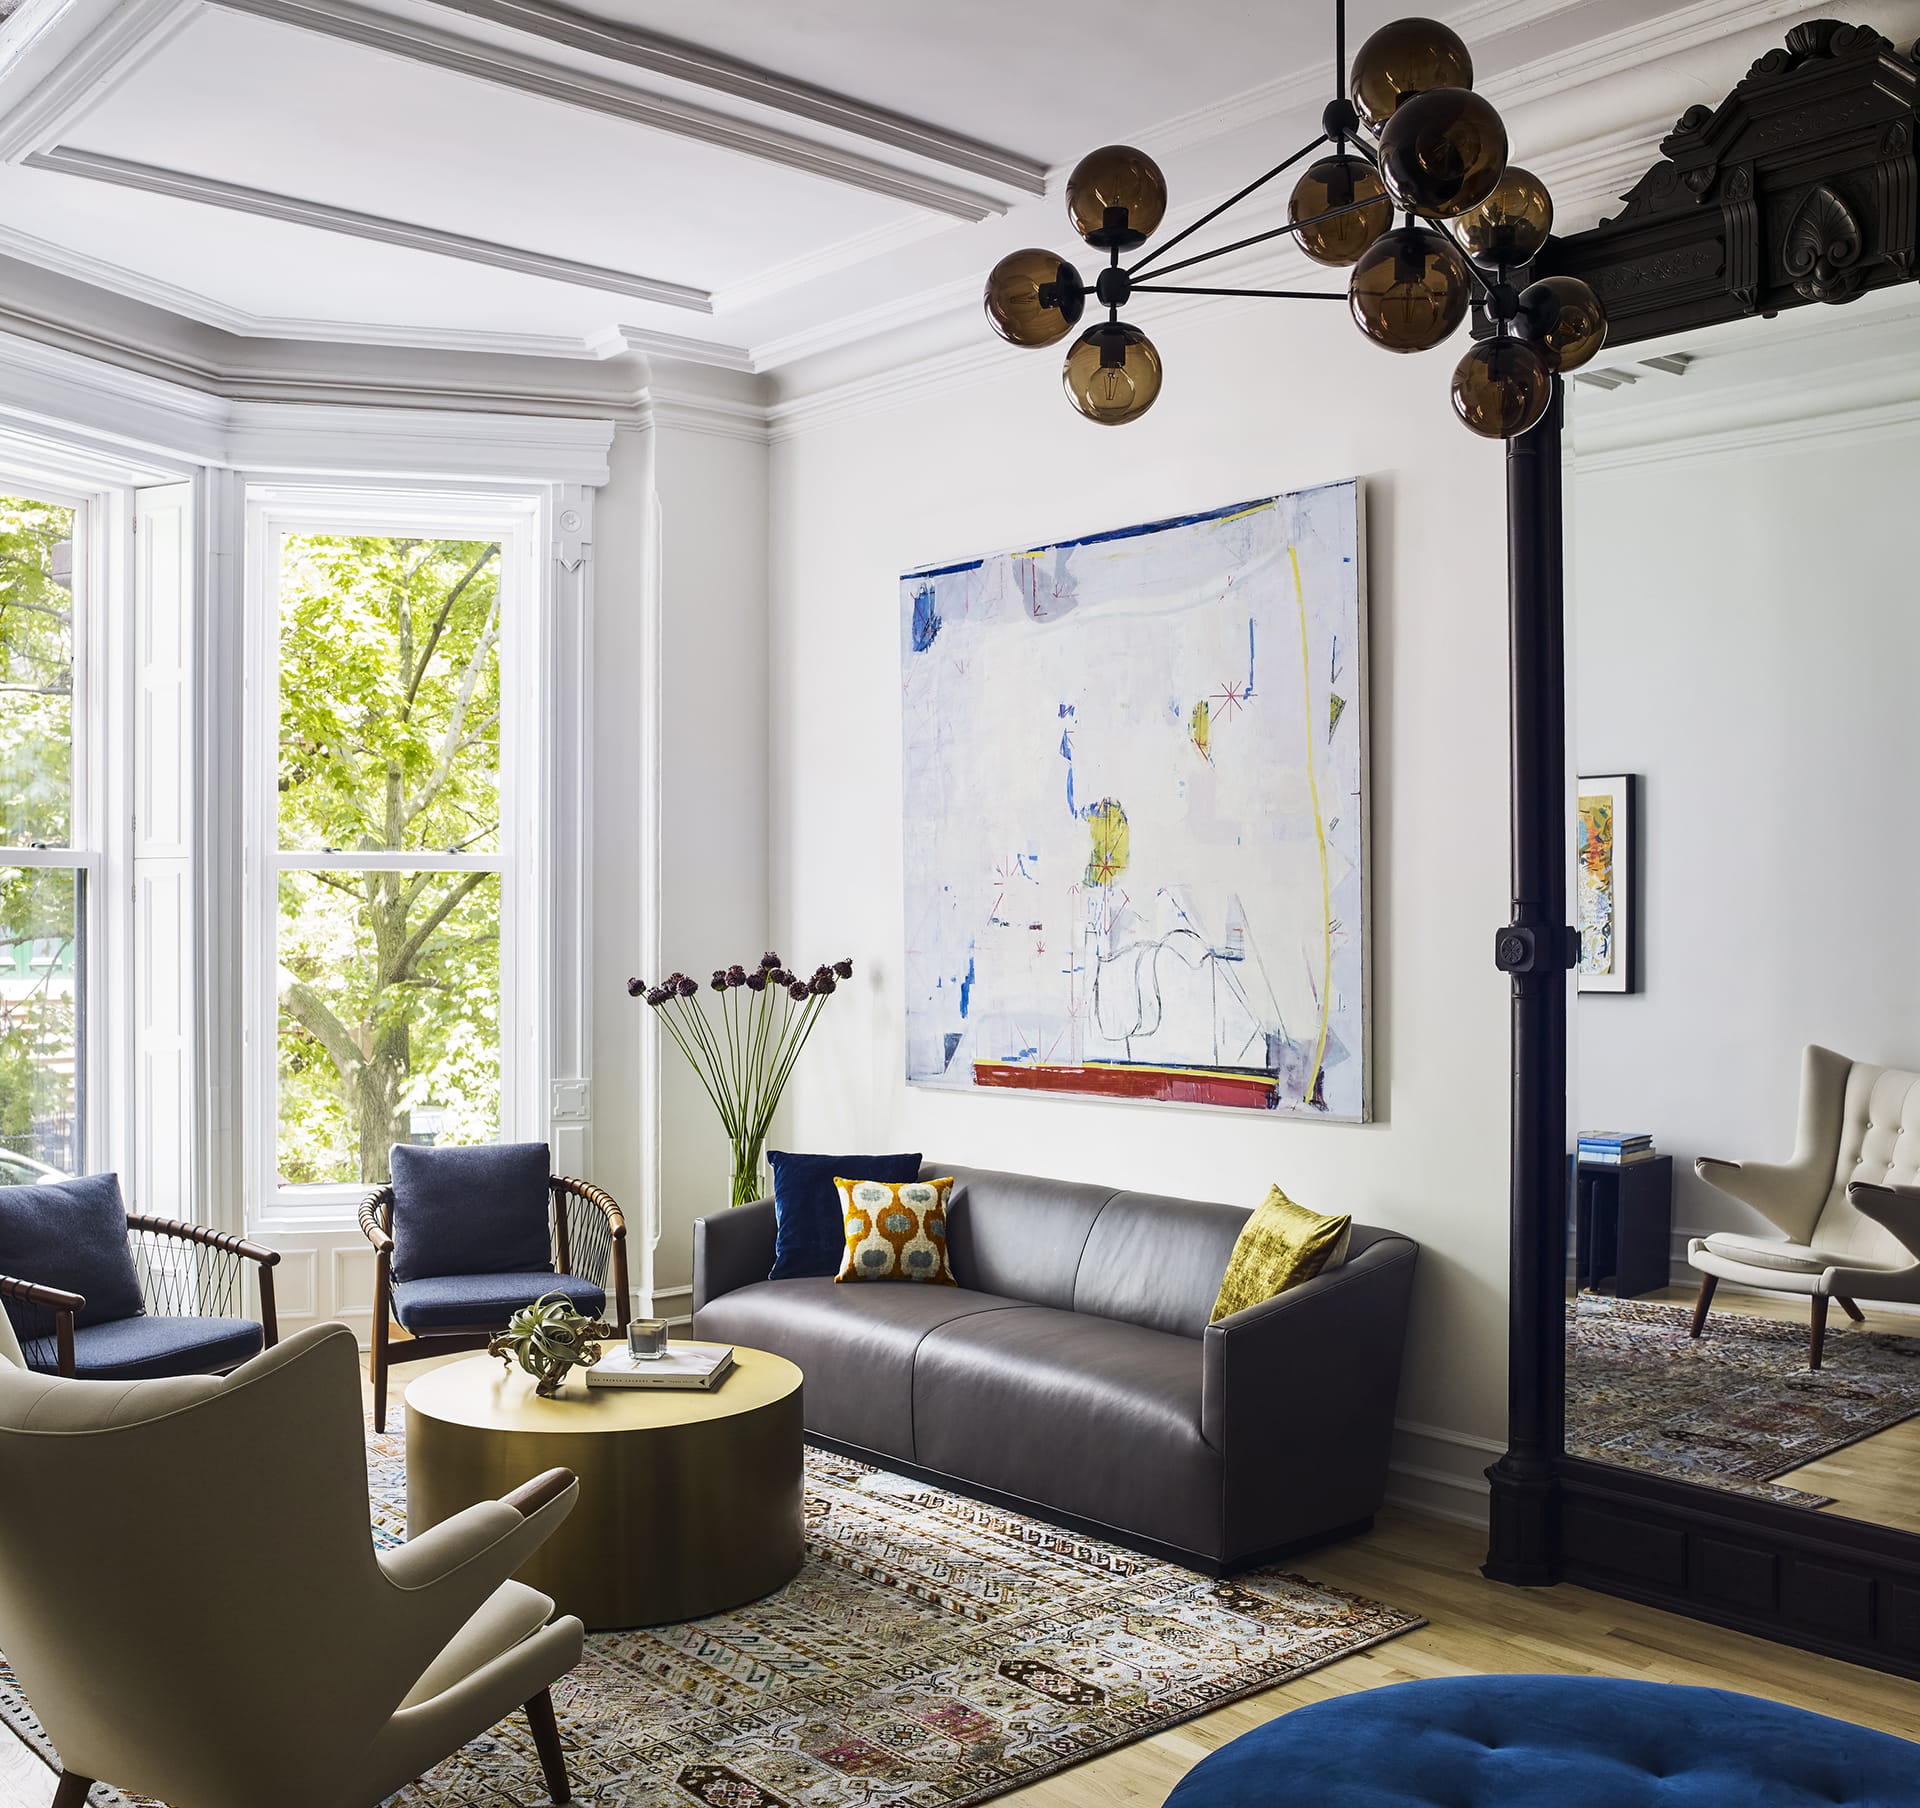 Living room of a Prospect Heights home with a restored, large mirror, large artwork, and mismatched furniture